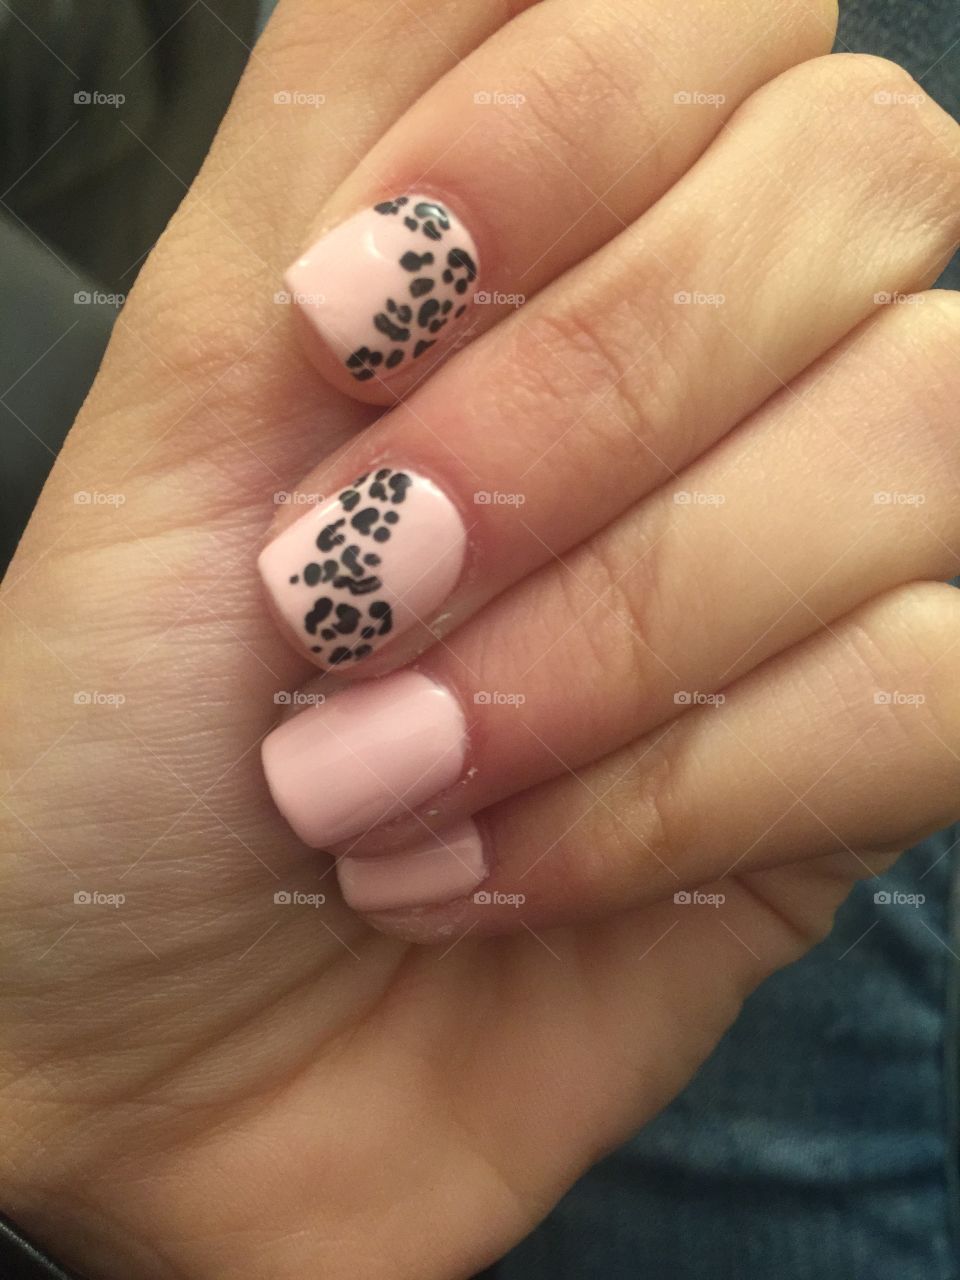 Girly manicure with a leopard pattern 